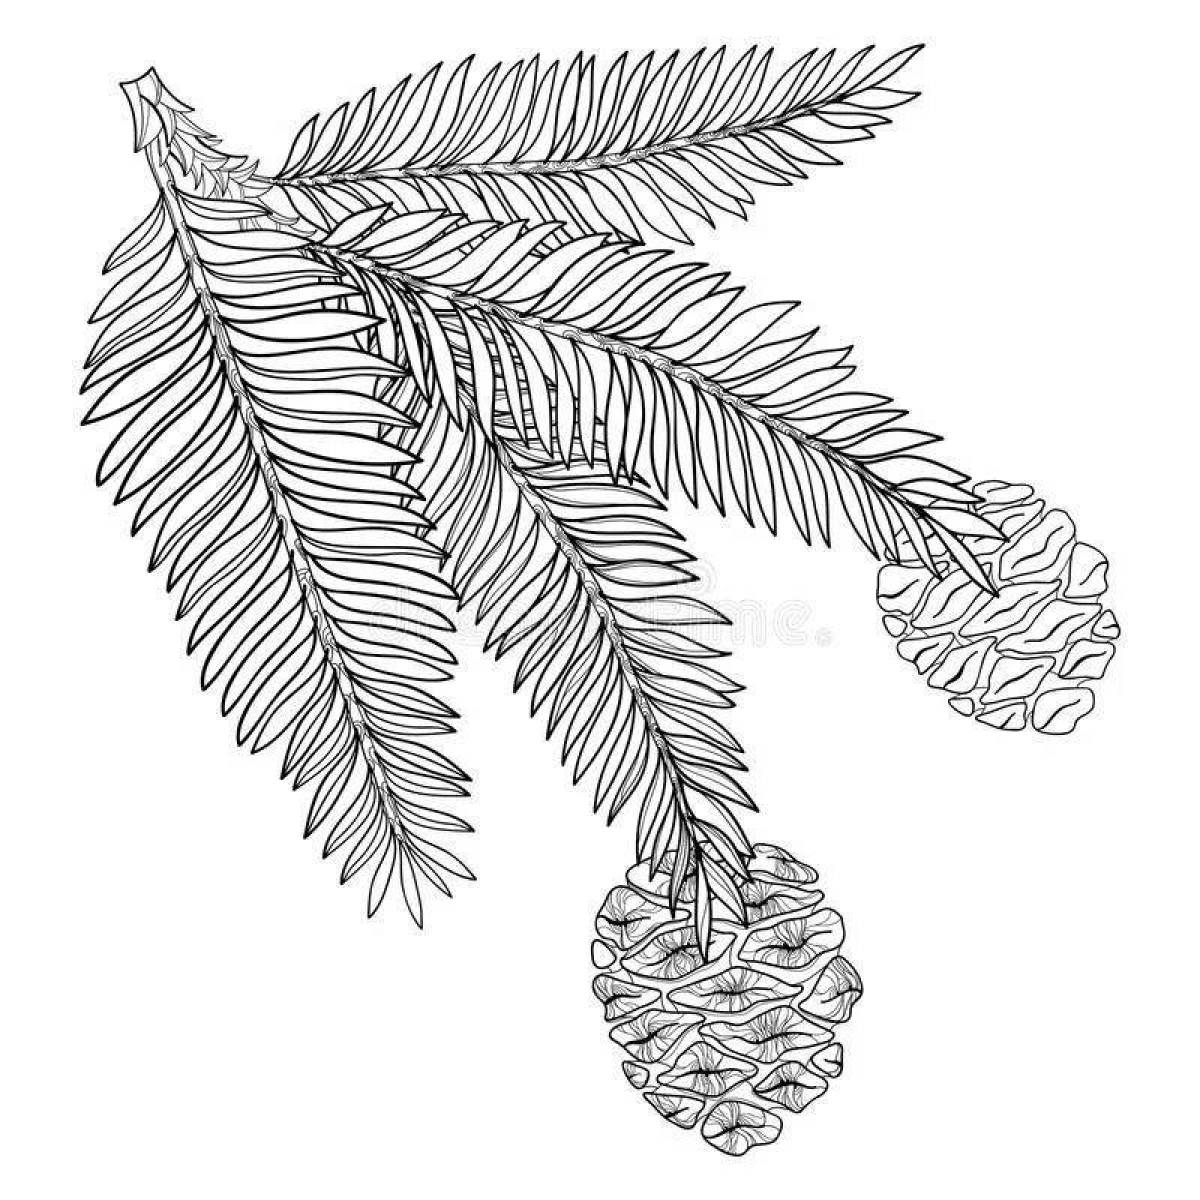 Coloring page graceful sprig of spruce